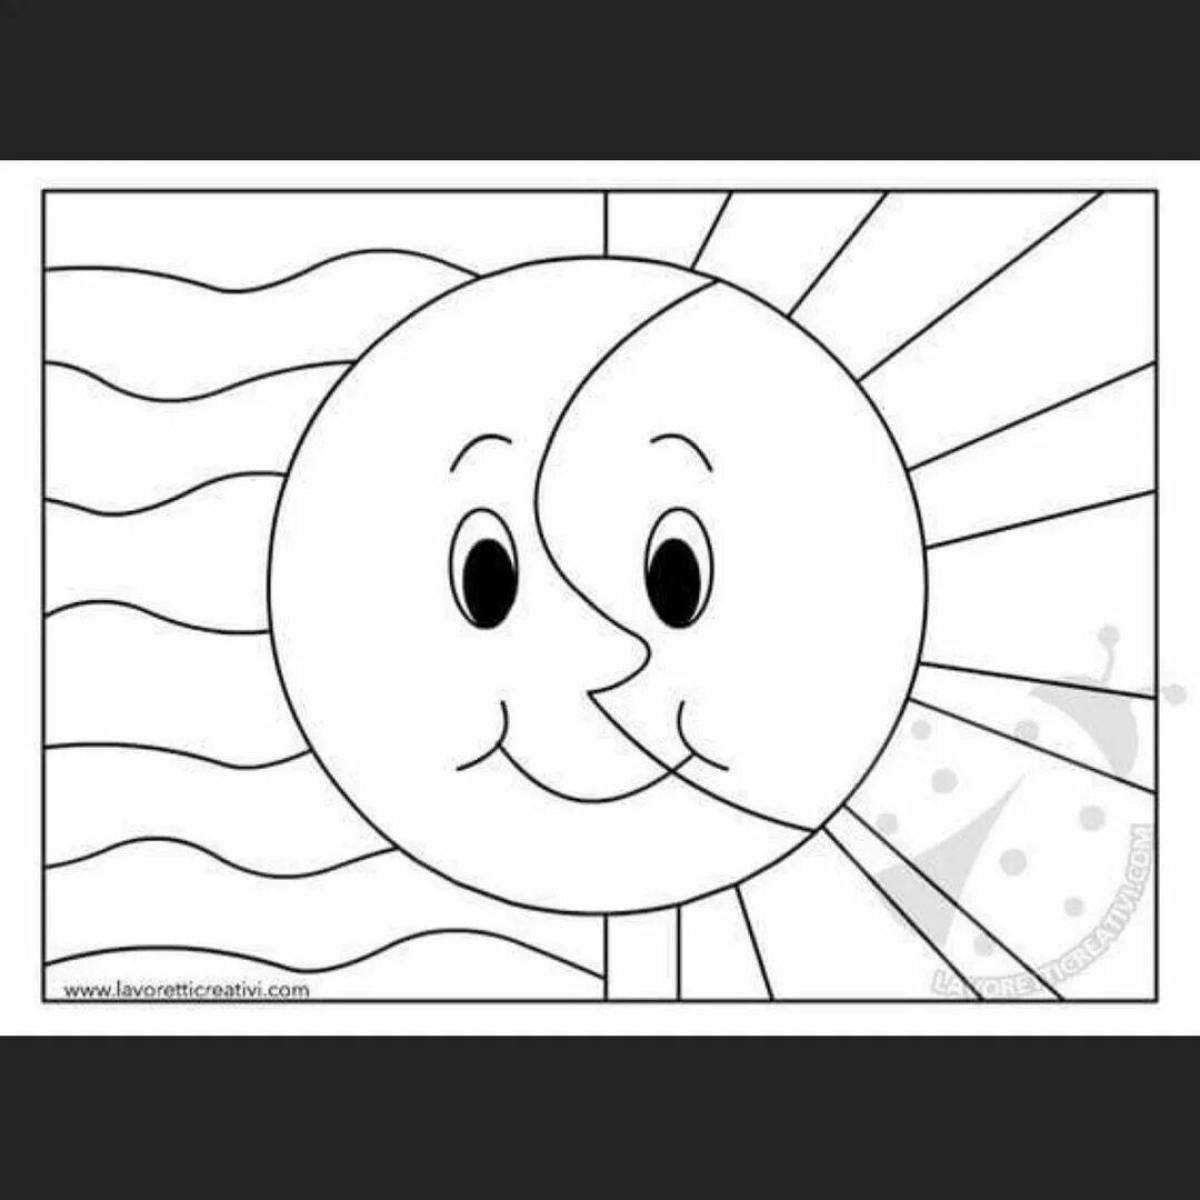 Great moon and sun coloring book for kids